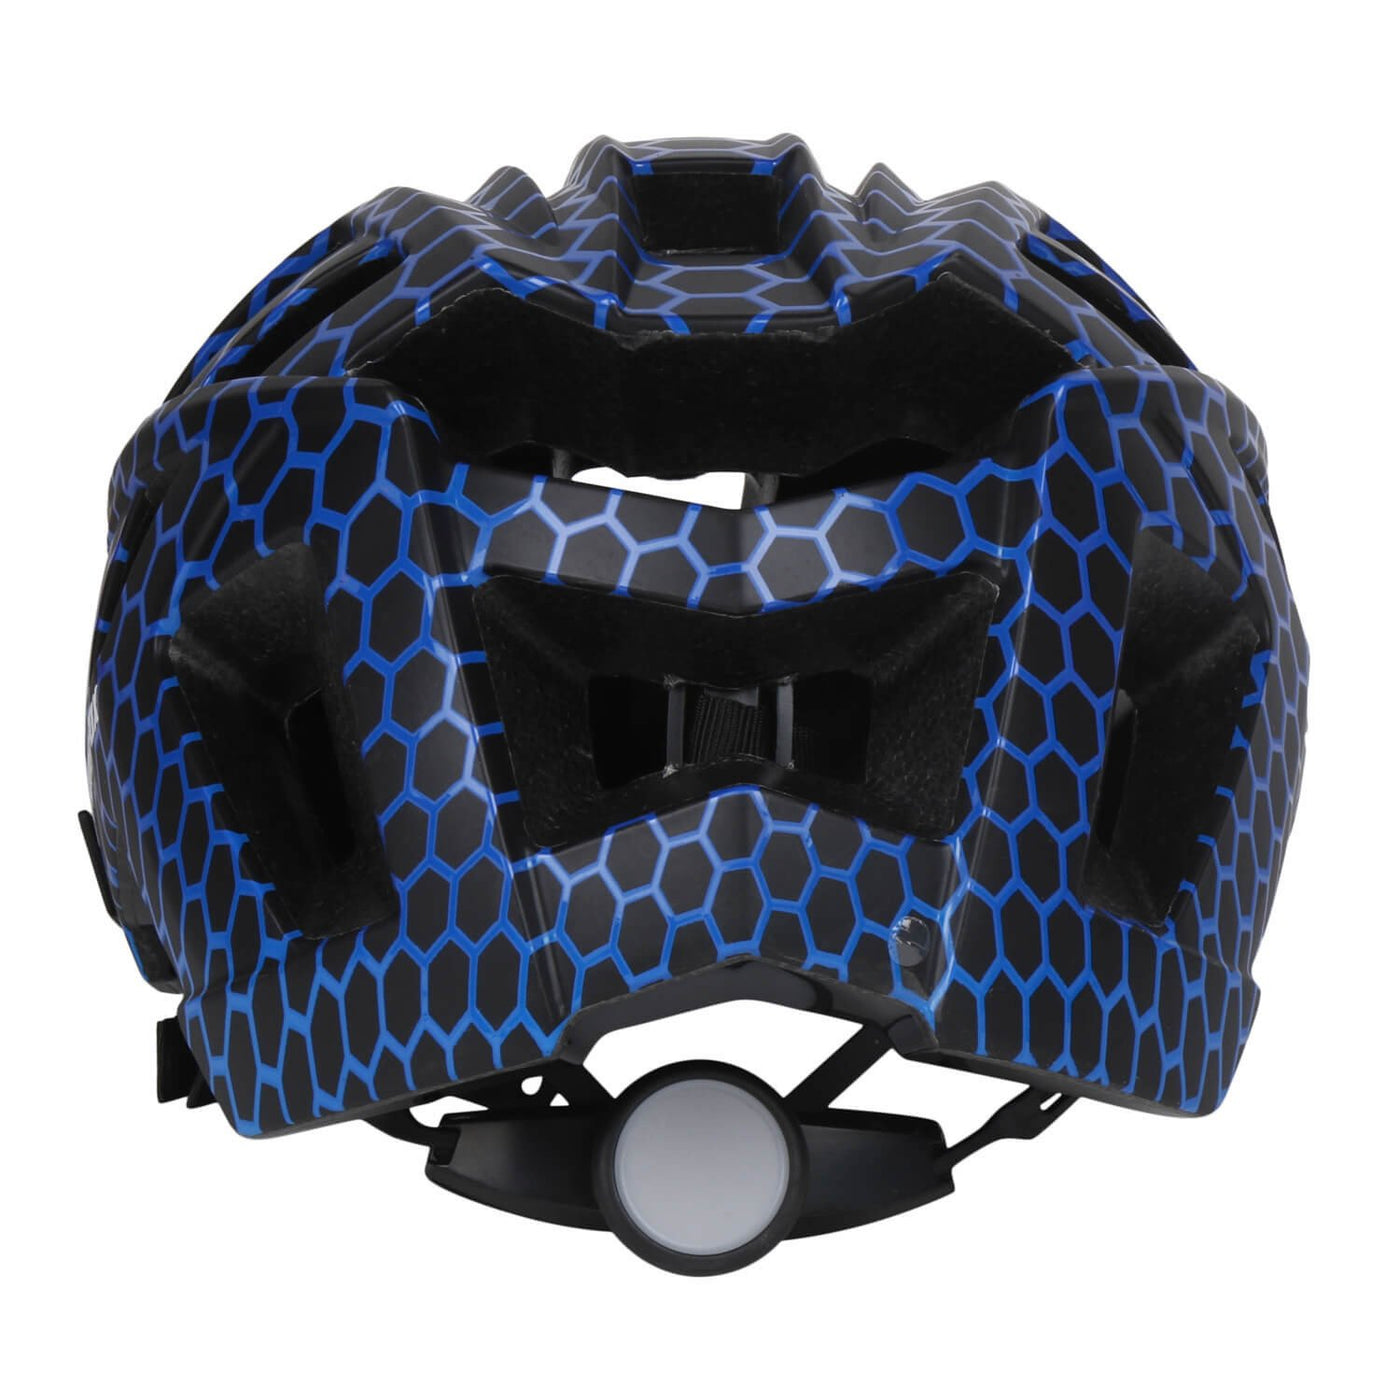 Firefox Headprotector-S279  - Blue/Black - Cyclop.in